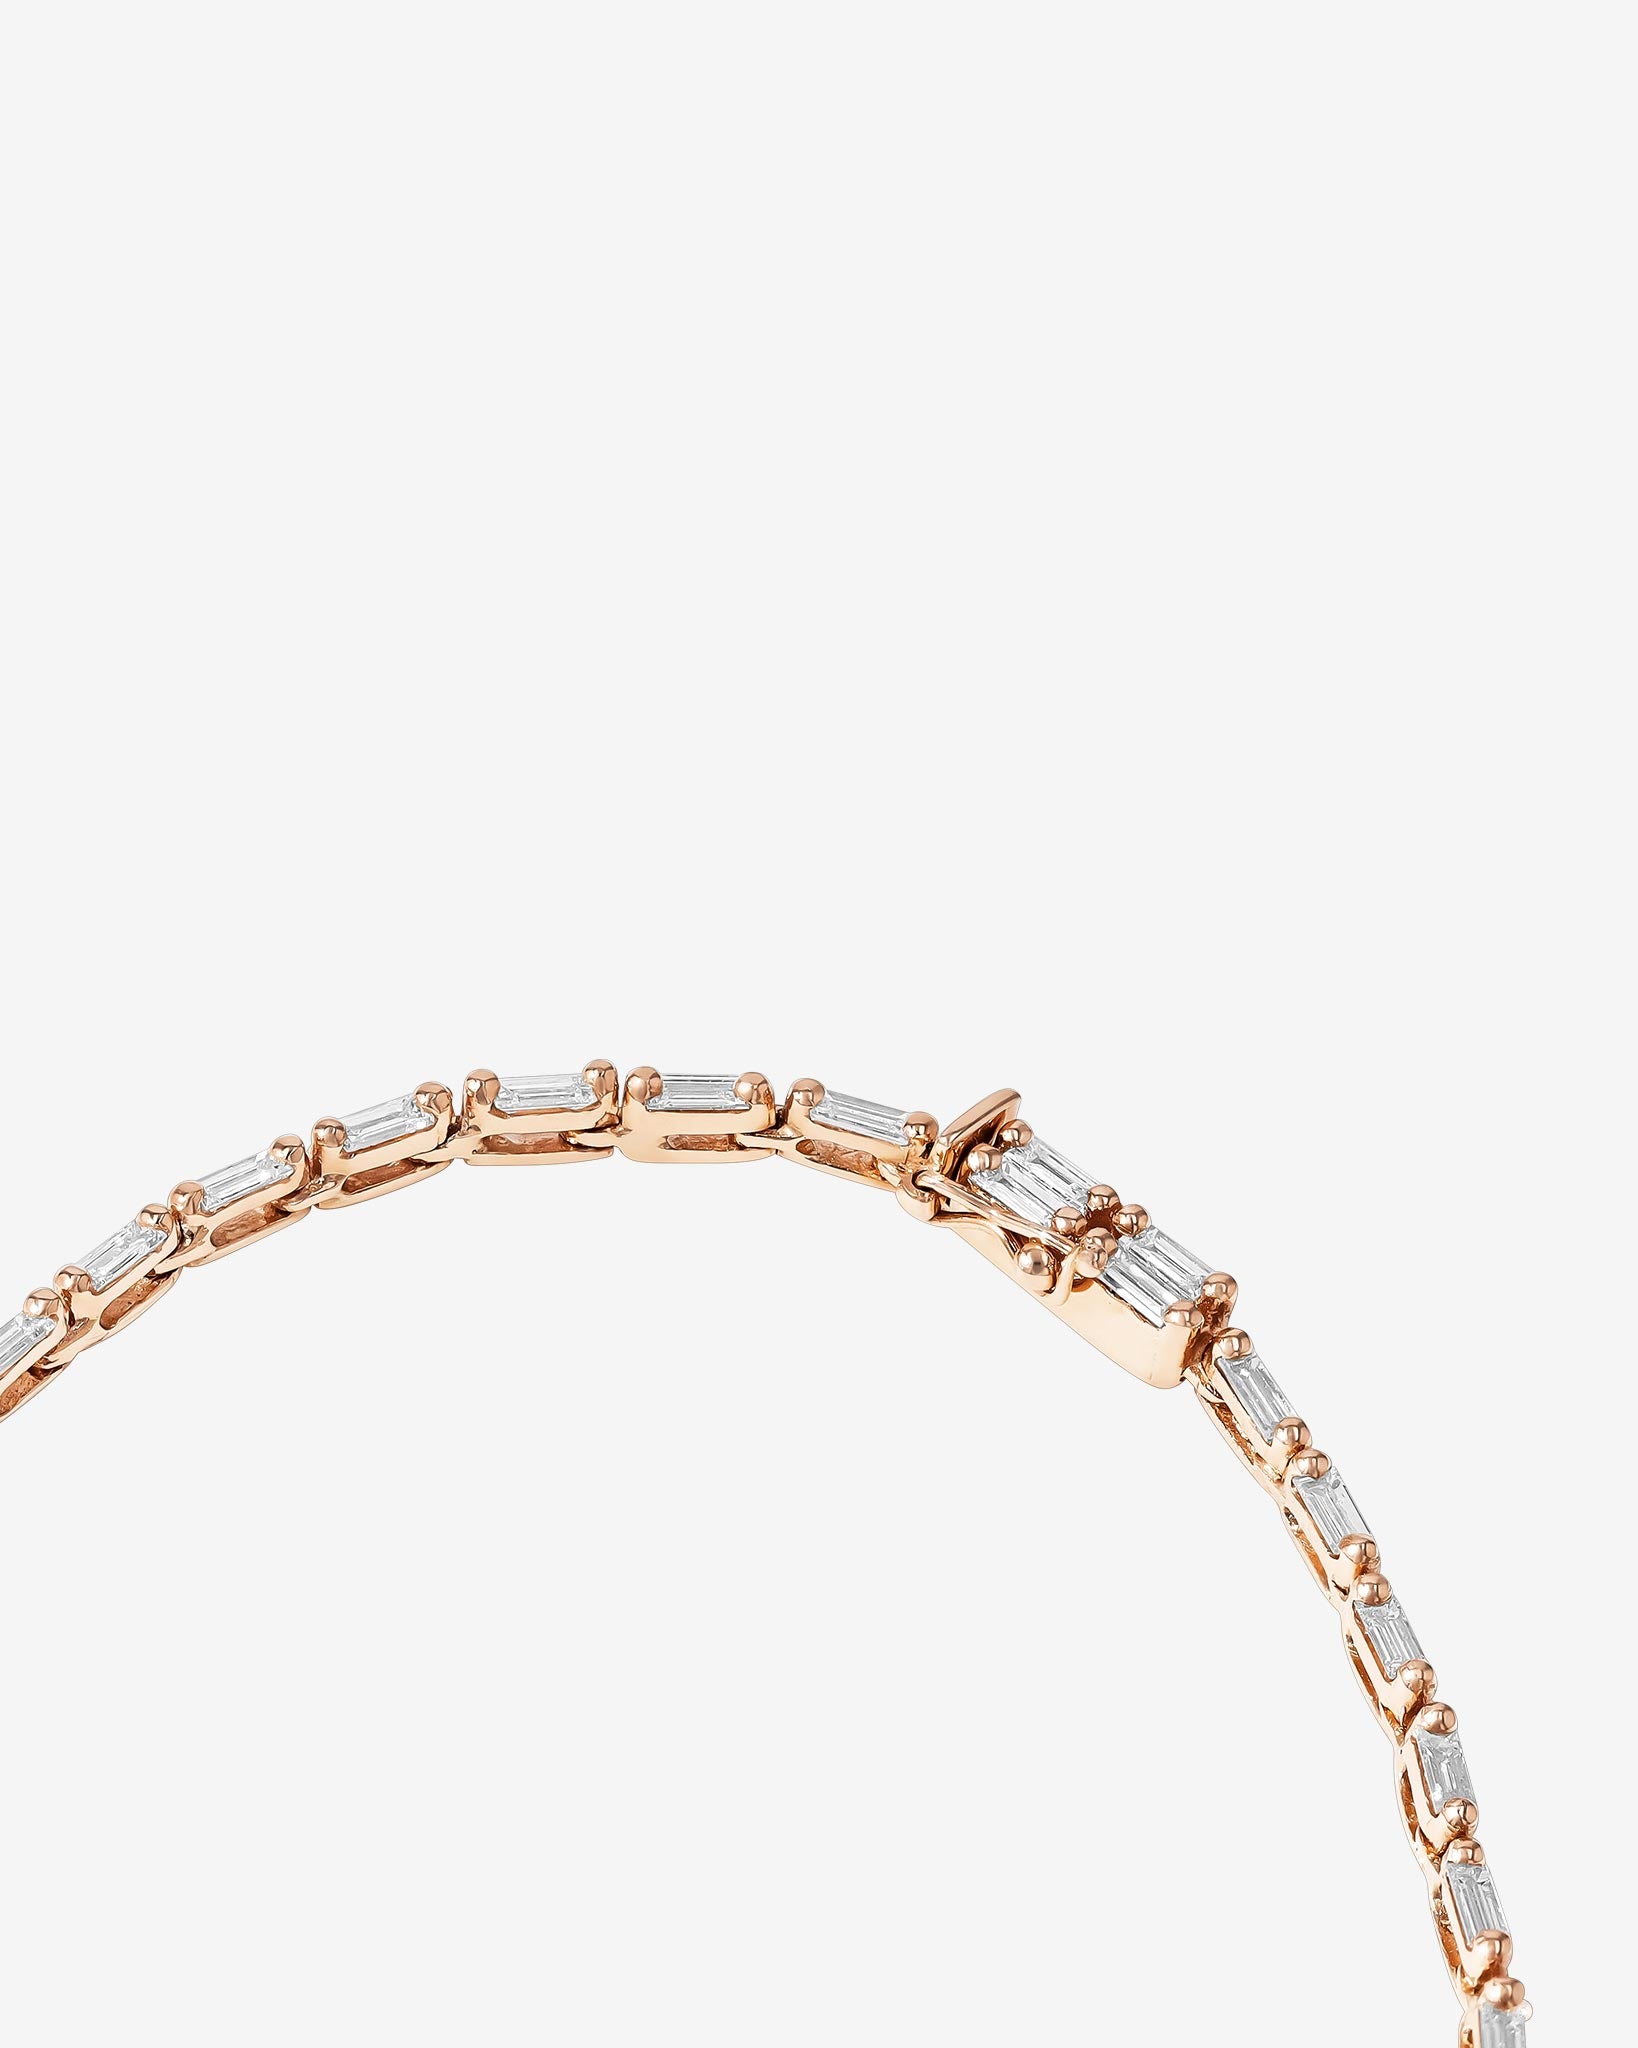 Suzanne Kalan Linear Full Diamond Tennis Necklace in 18k rose gold